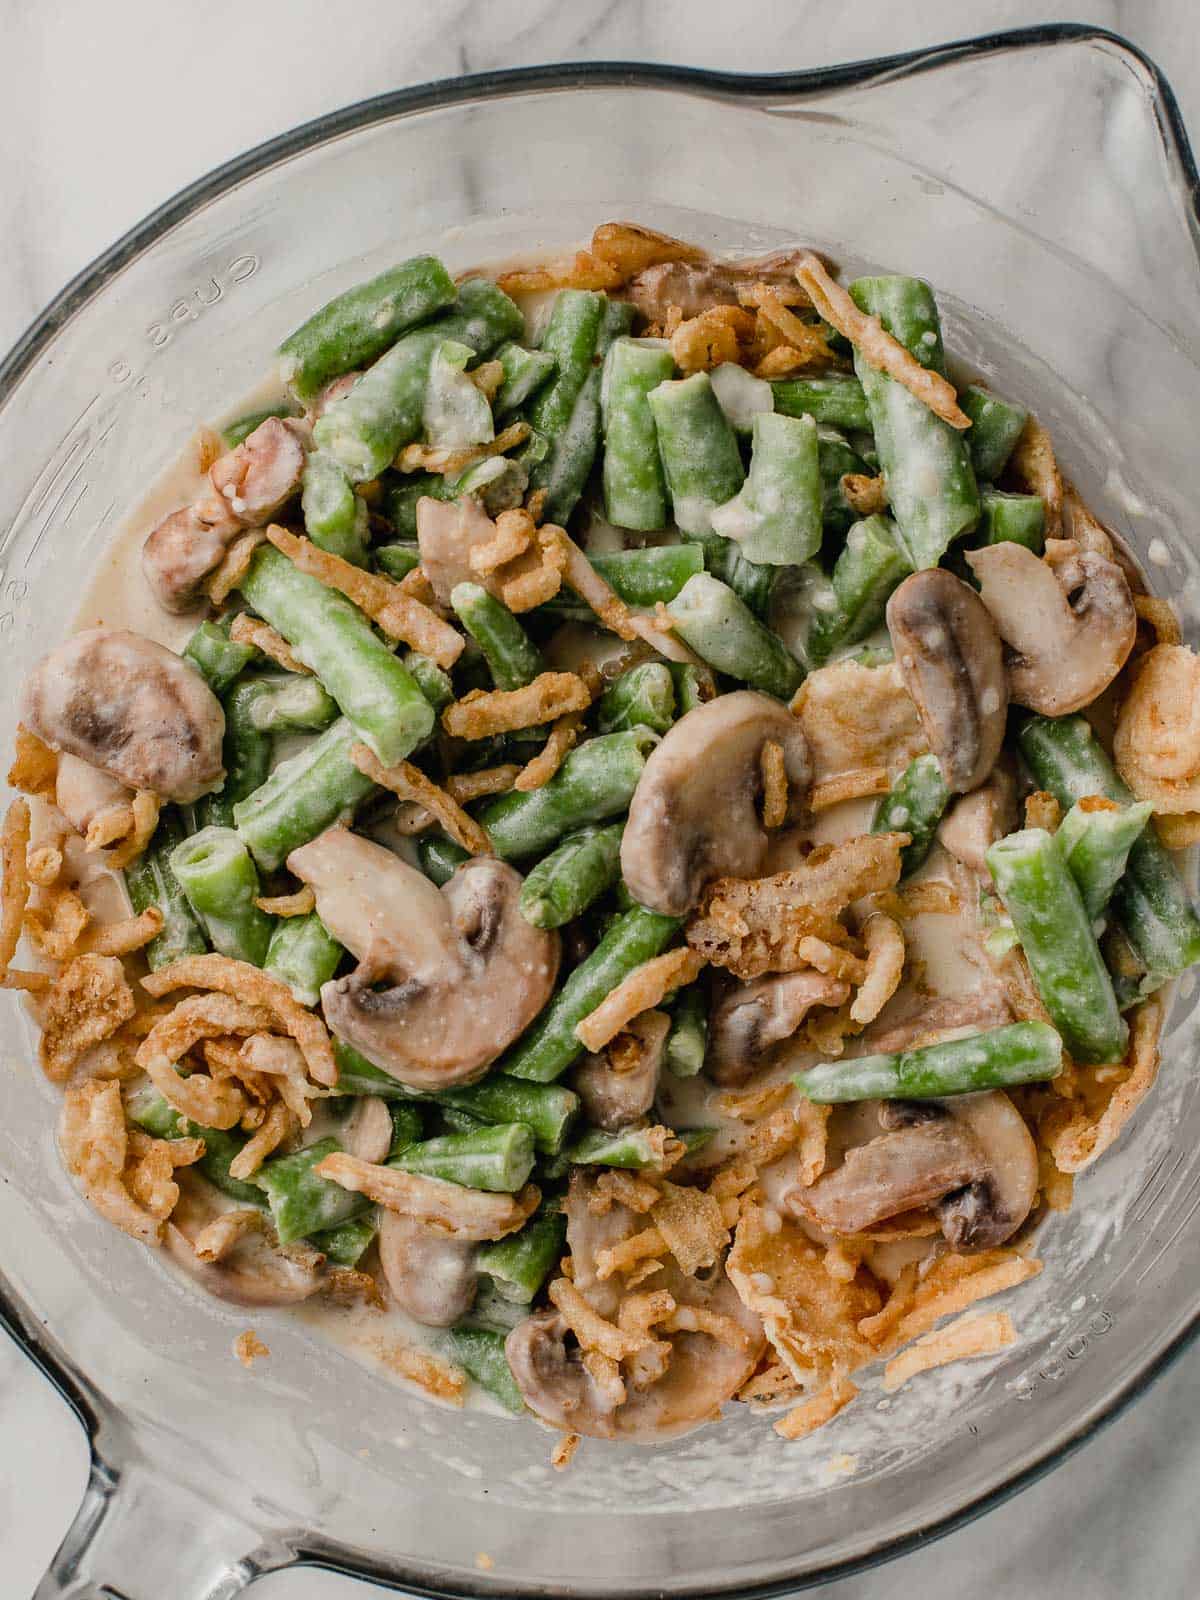 Green bean casserole ingredients in a large bowl.